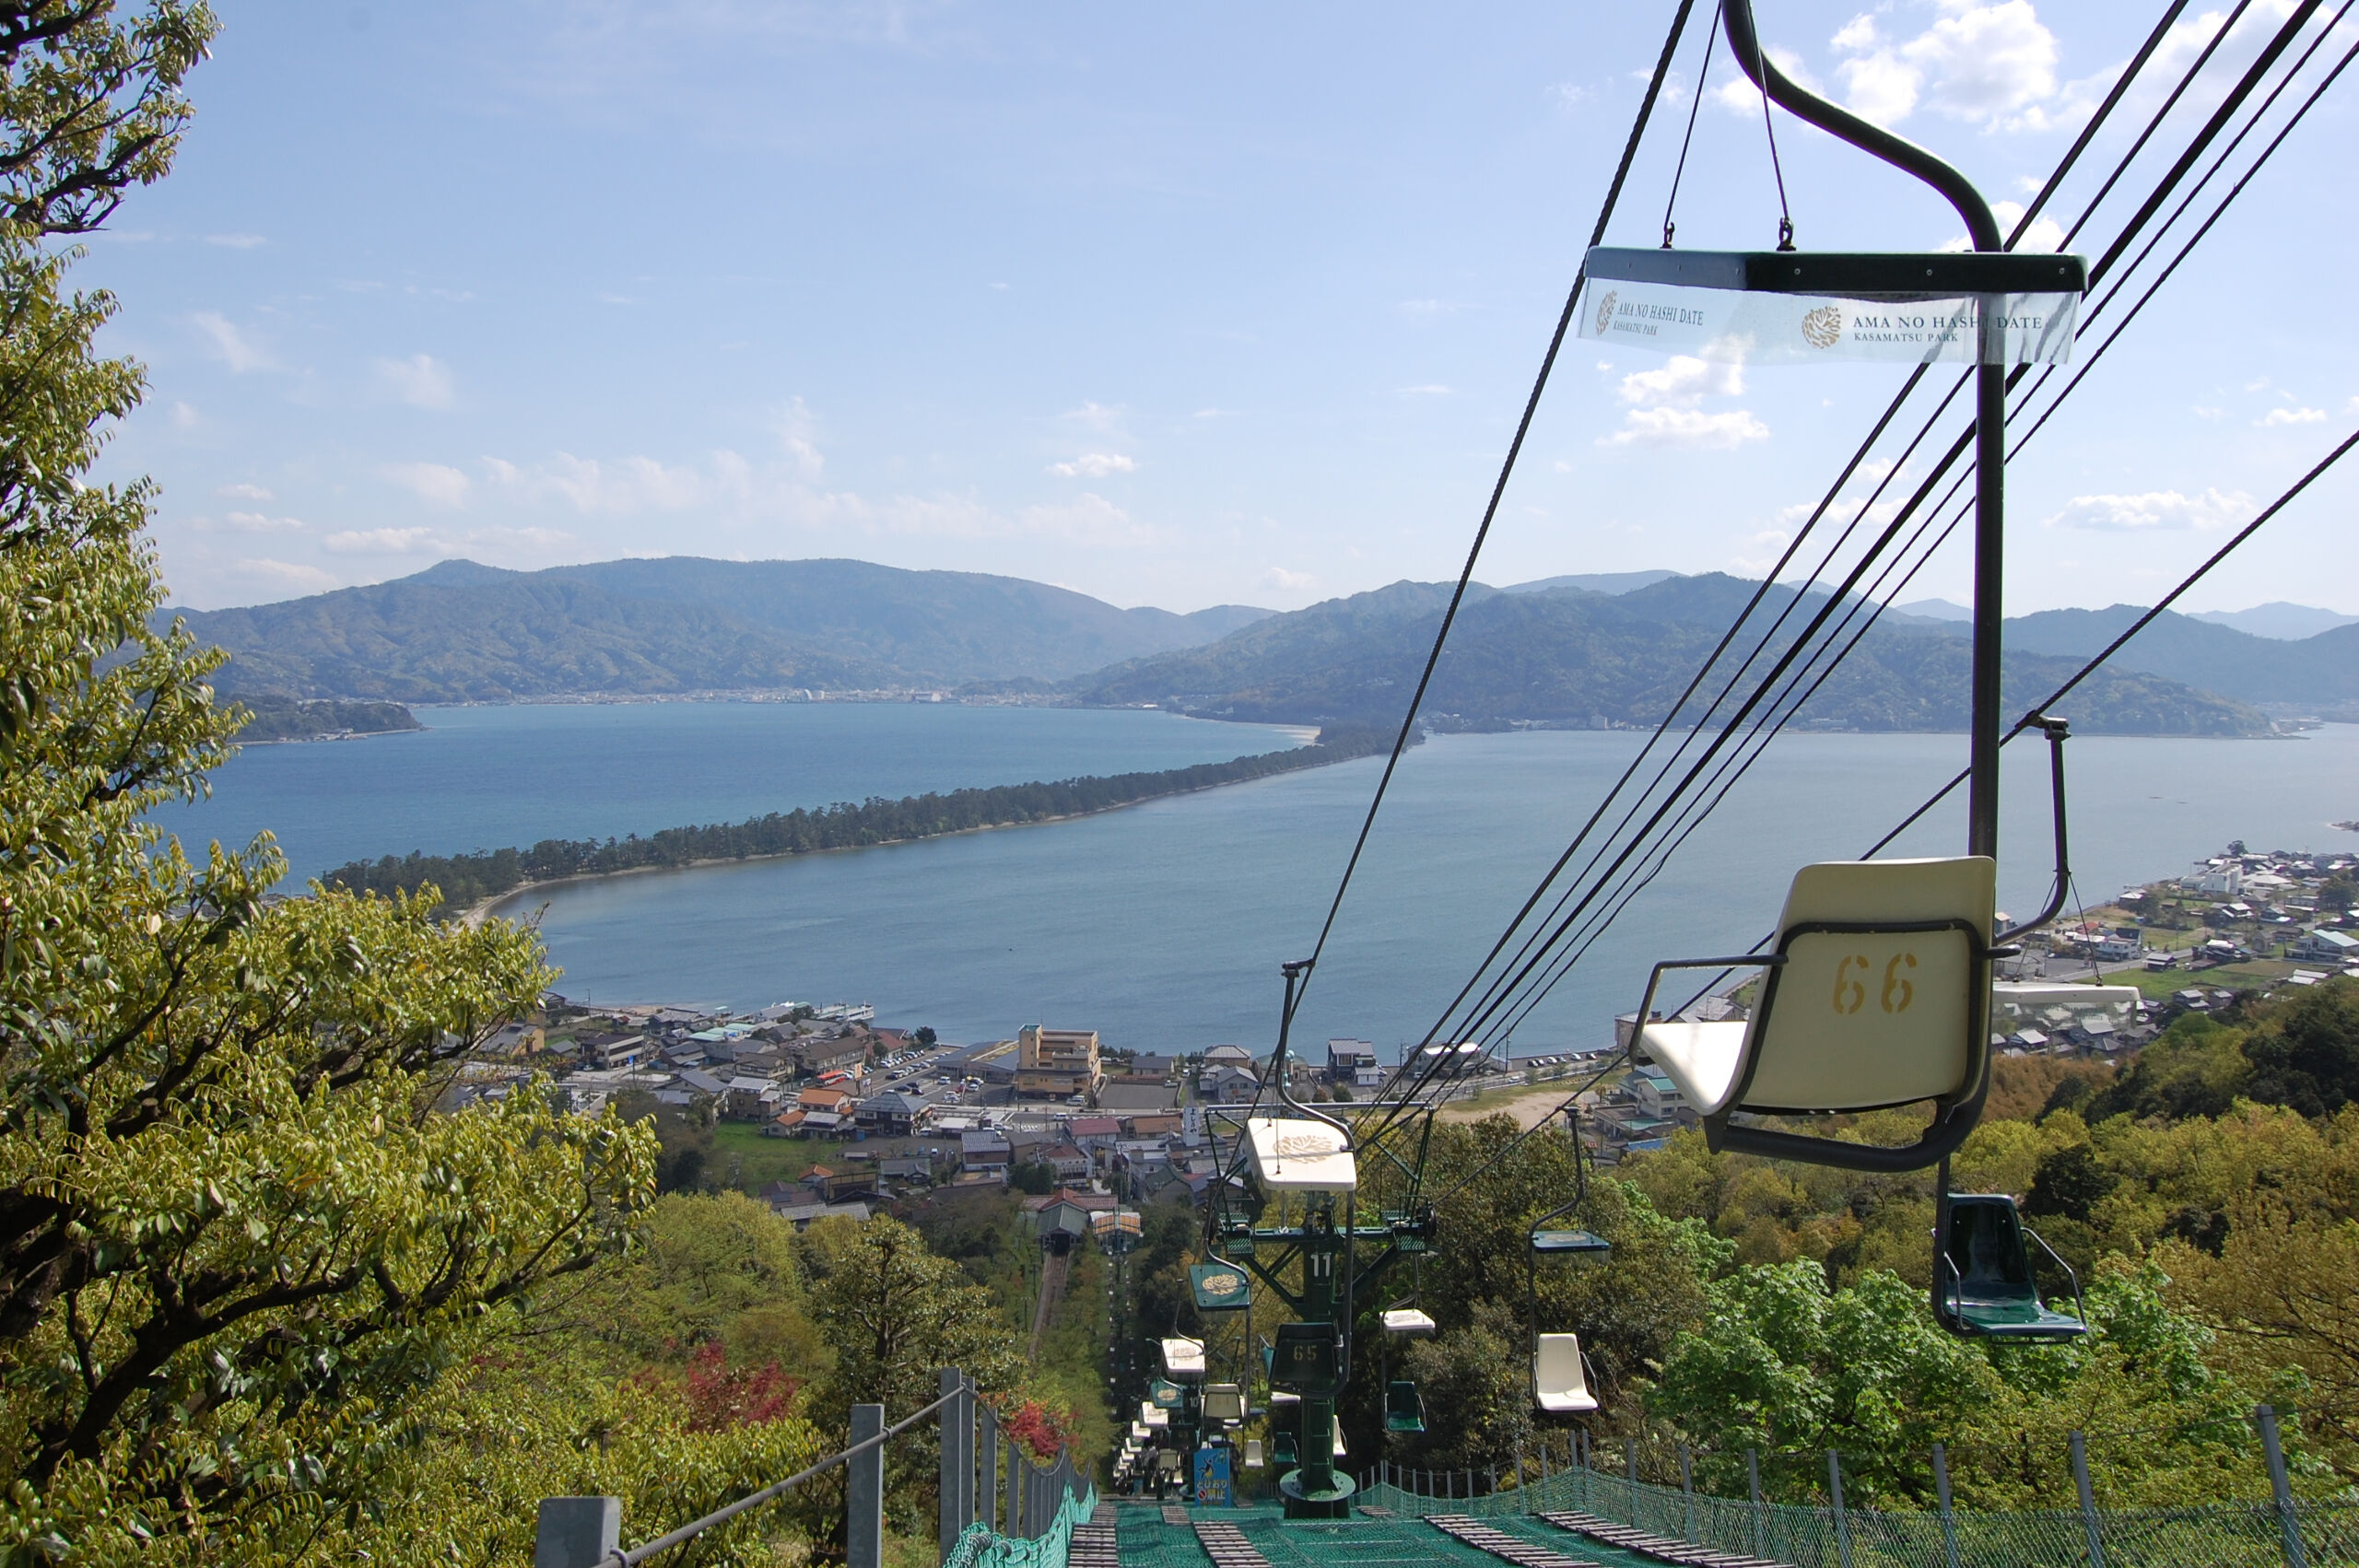 Kyoto 【Amanohashidate・Ine・Tango】2 Day Free Ticket <Line bus, sightseeing boat, cable car, sightseeing boat>